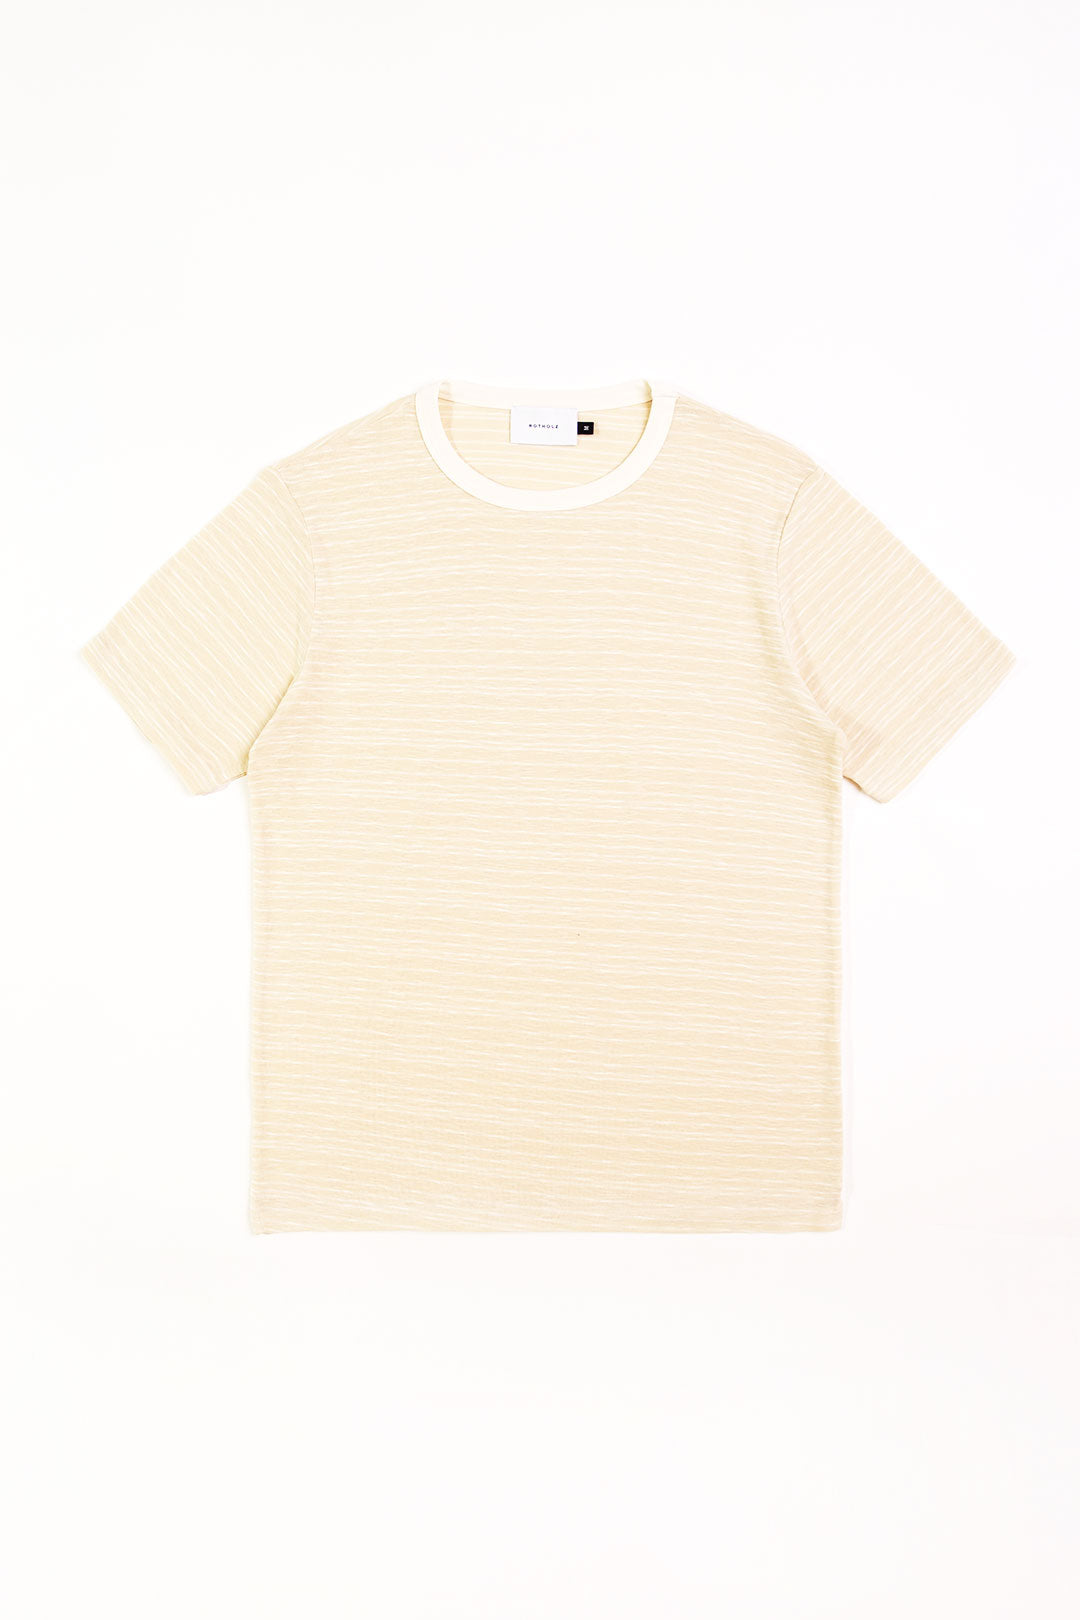 Beige, striped T-shirt made of organic cotton from Rotholz